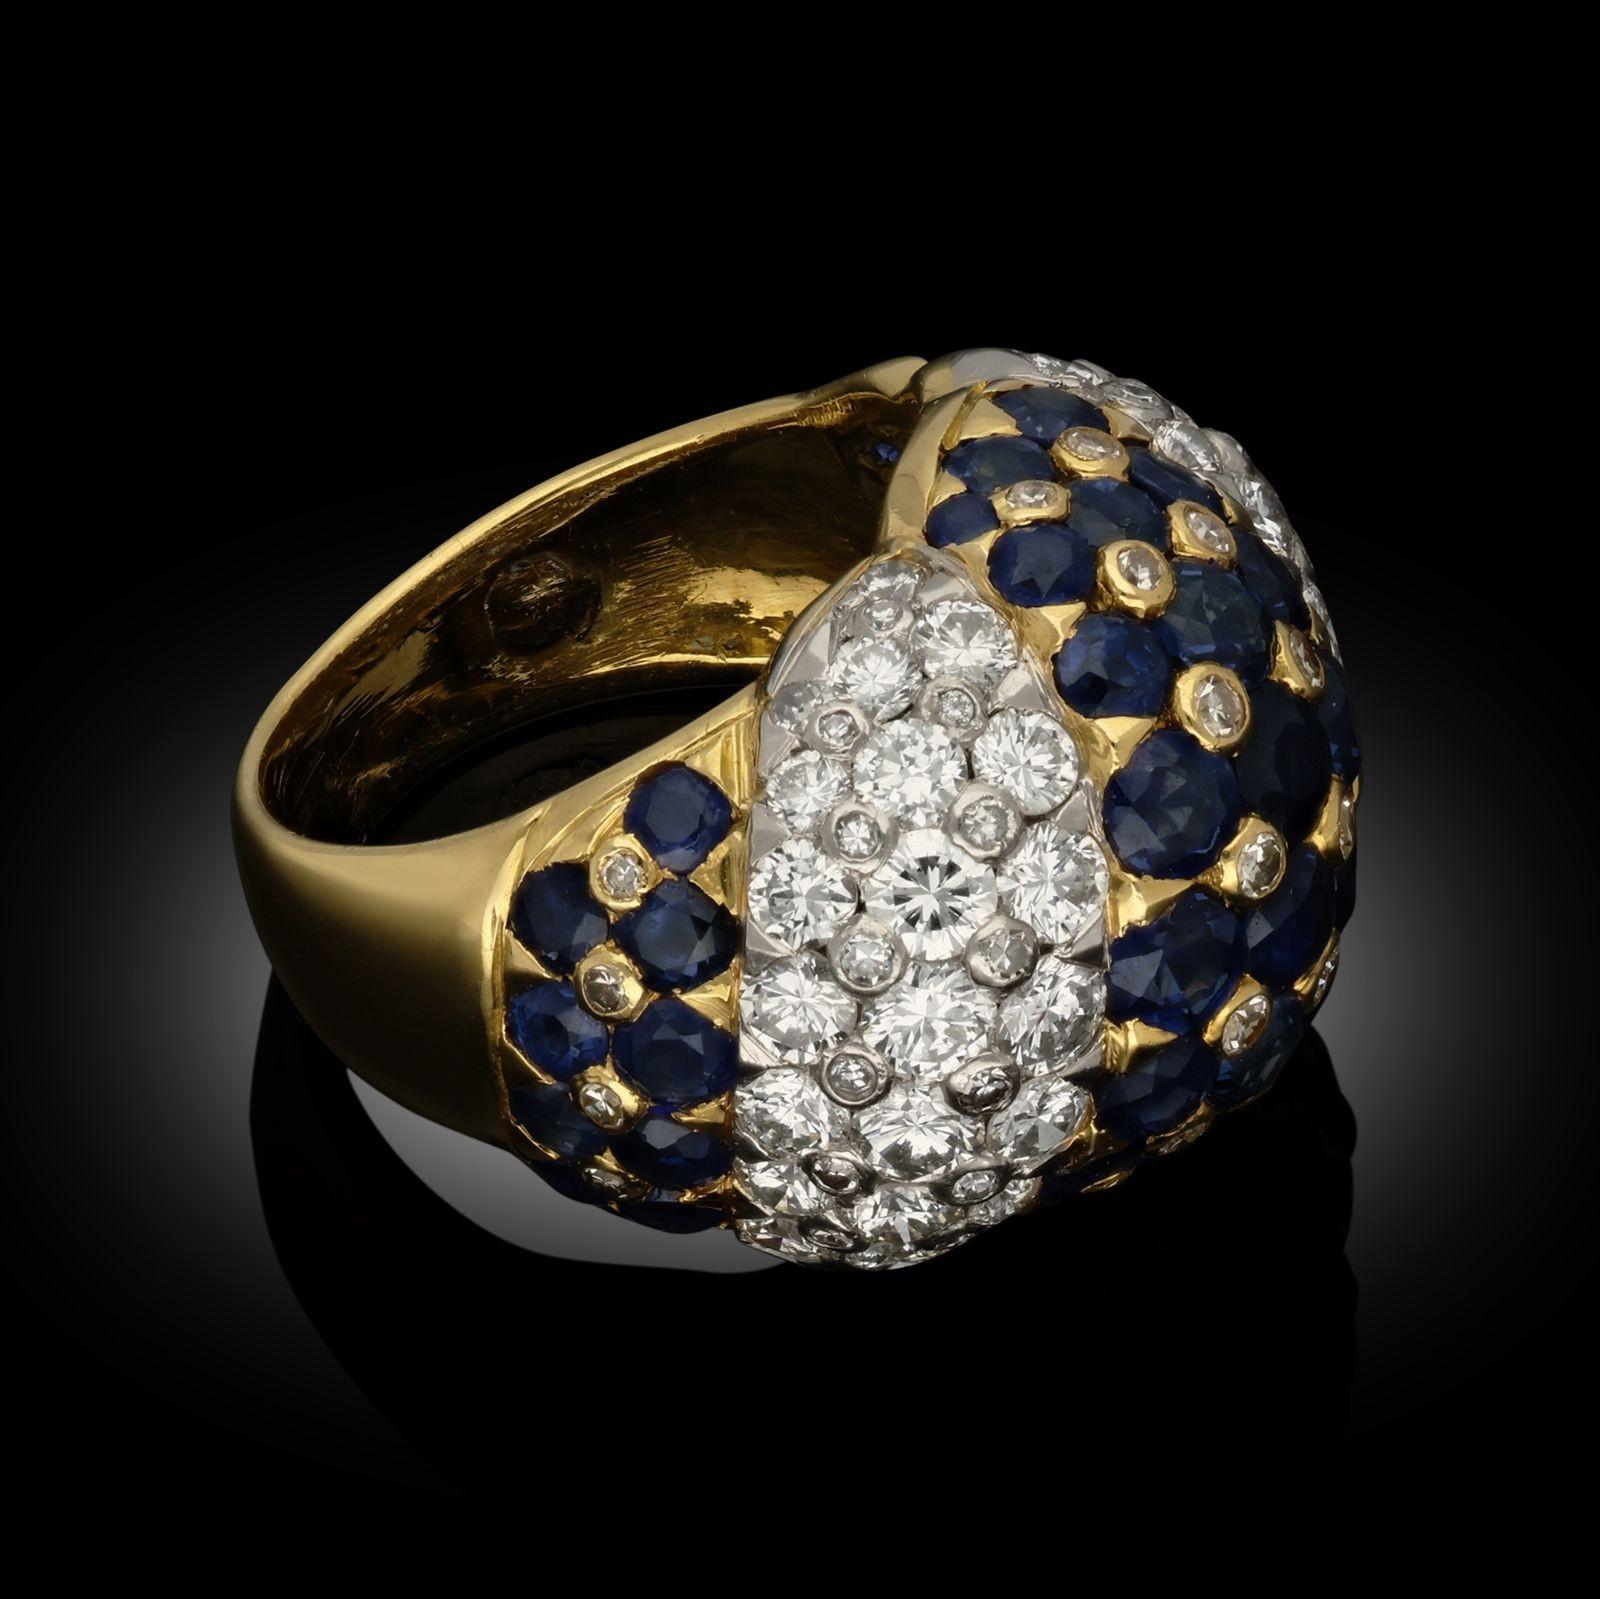 A vintage 18ct gold, diamond and sapphire dress ring by Tiffany & Co. circa 1970s, the domed shape bombé ring pavé set throughout with round faceted diamonds and sapphires in a diagonal banded stripe, the sapphires set in yellow gold and the